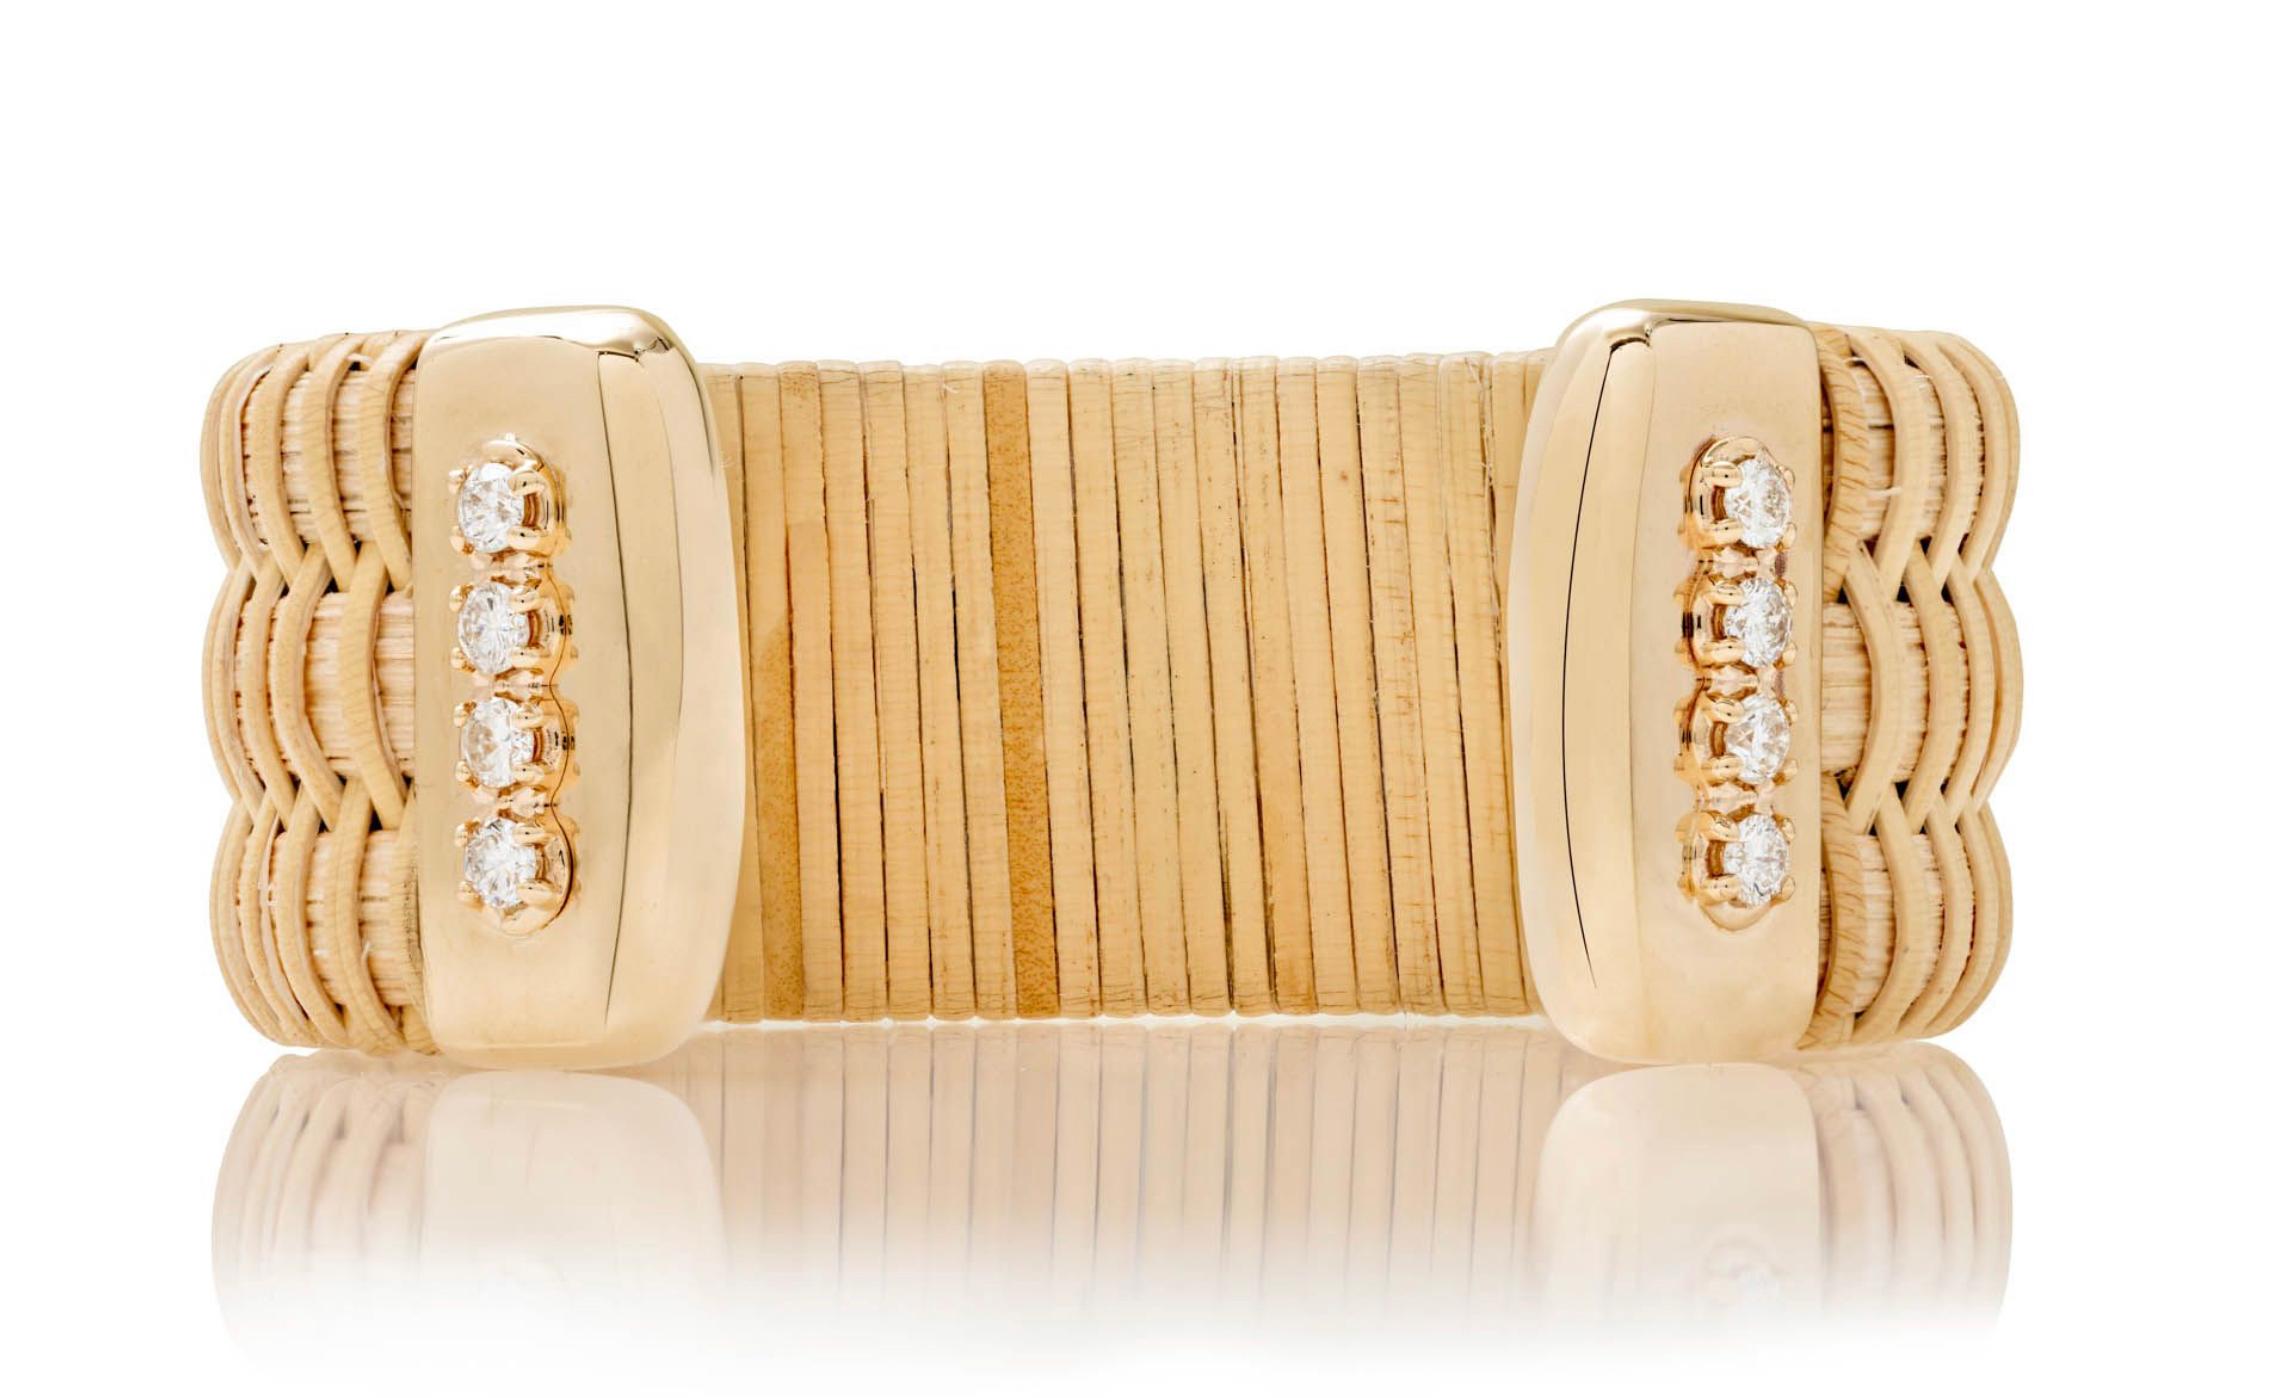 Nantucket Basket Lightship jewelry is a tradition in New England. This handmade cuff celebrates the tradition with a modern esthetic by adding gold and diamonds. Thick natural cain & rattan cuff with 10K yellow gold caps and 14K yellow gold setting